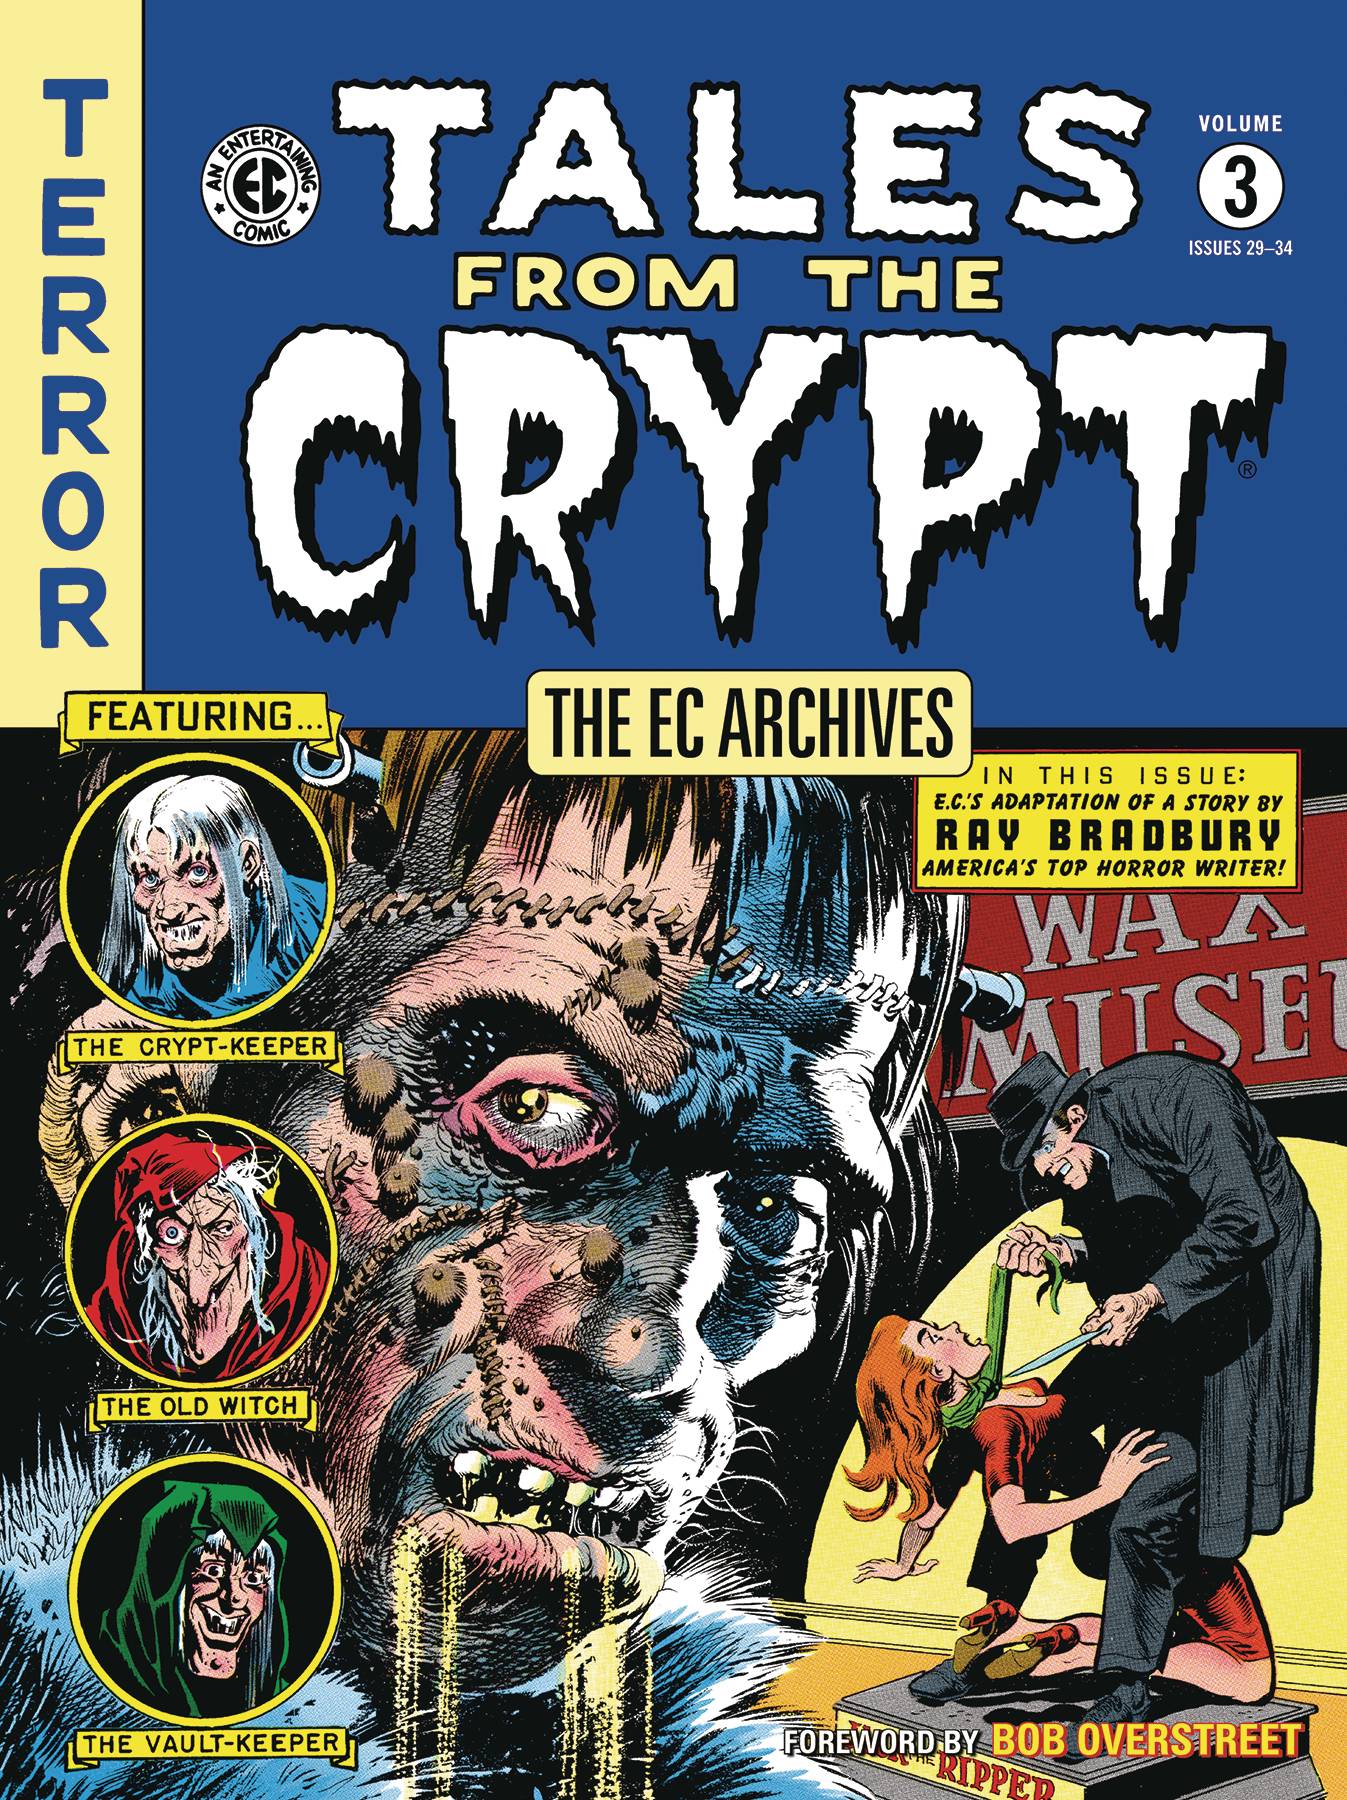 EC ARCHIVES TALES FROM CRYPT TP VOL 03